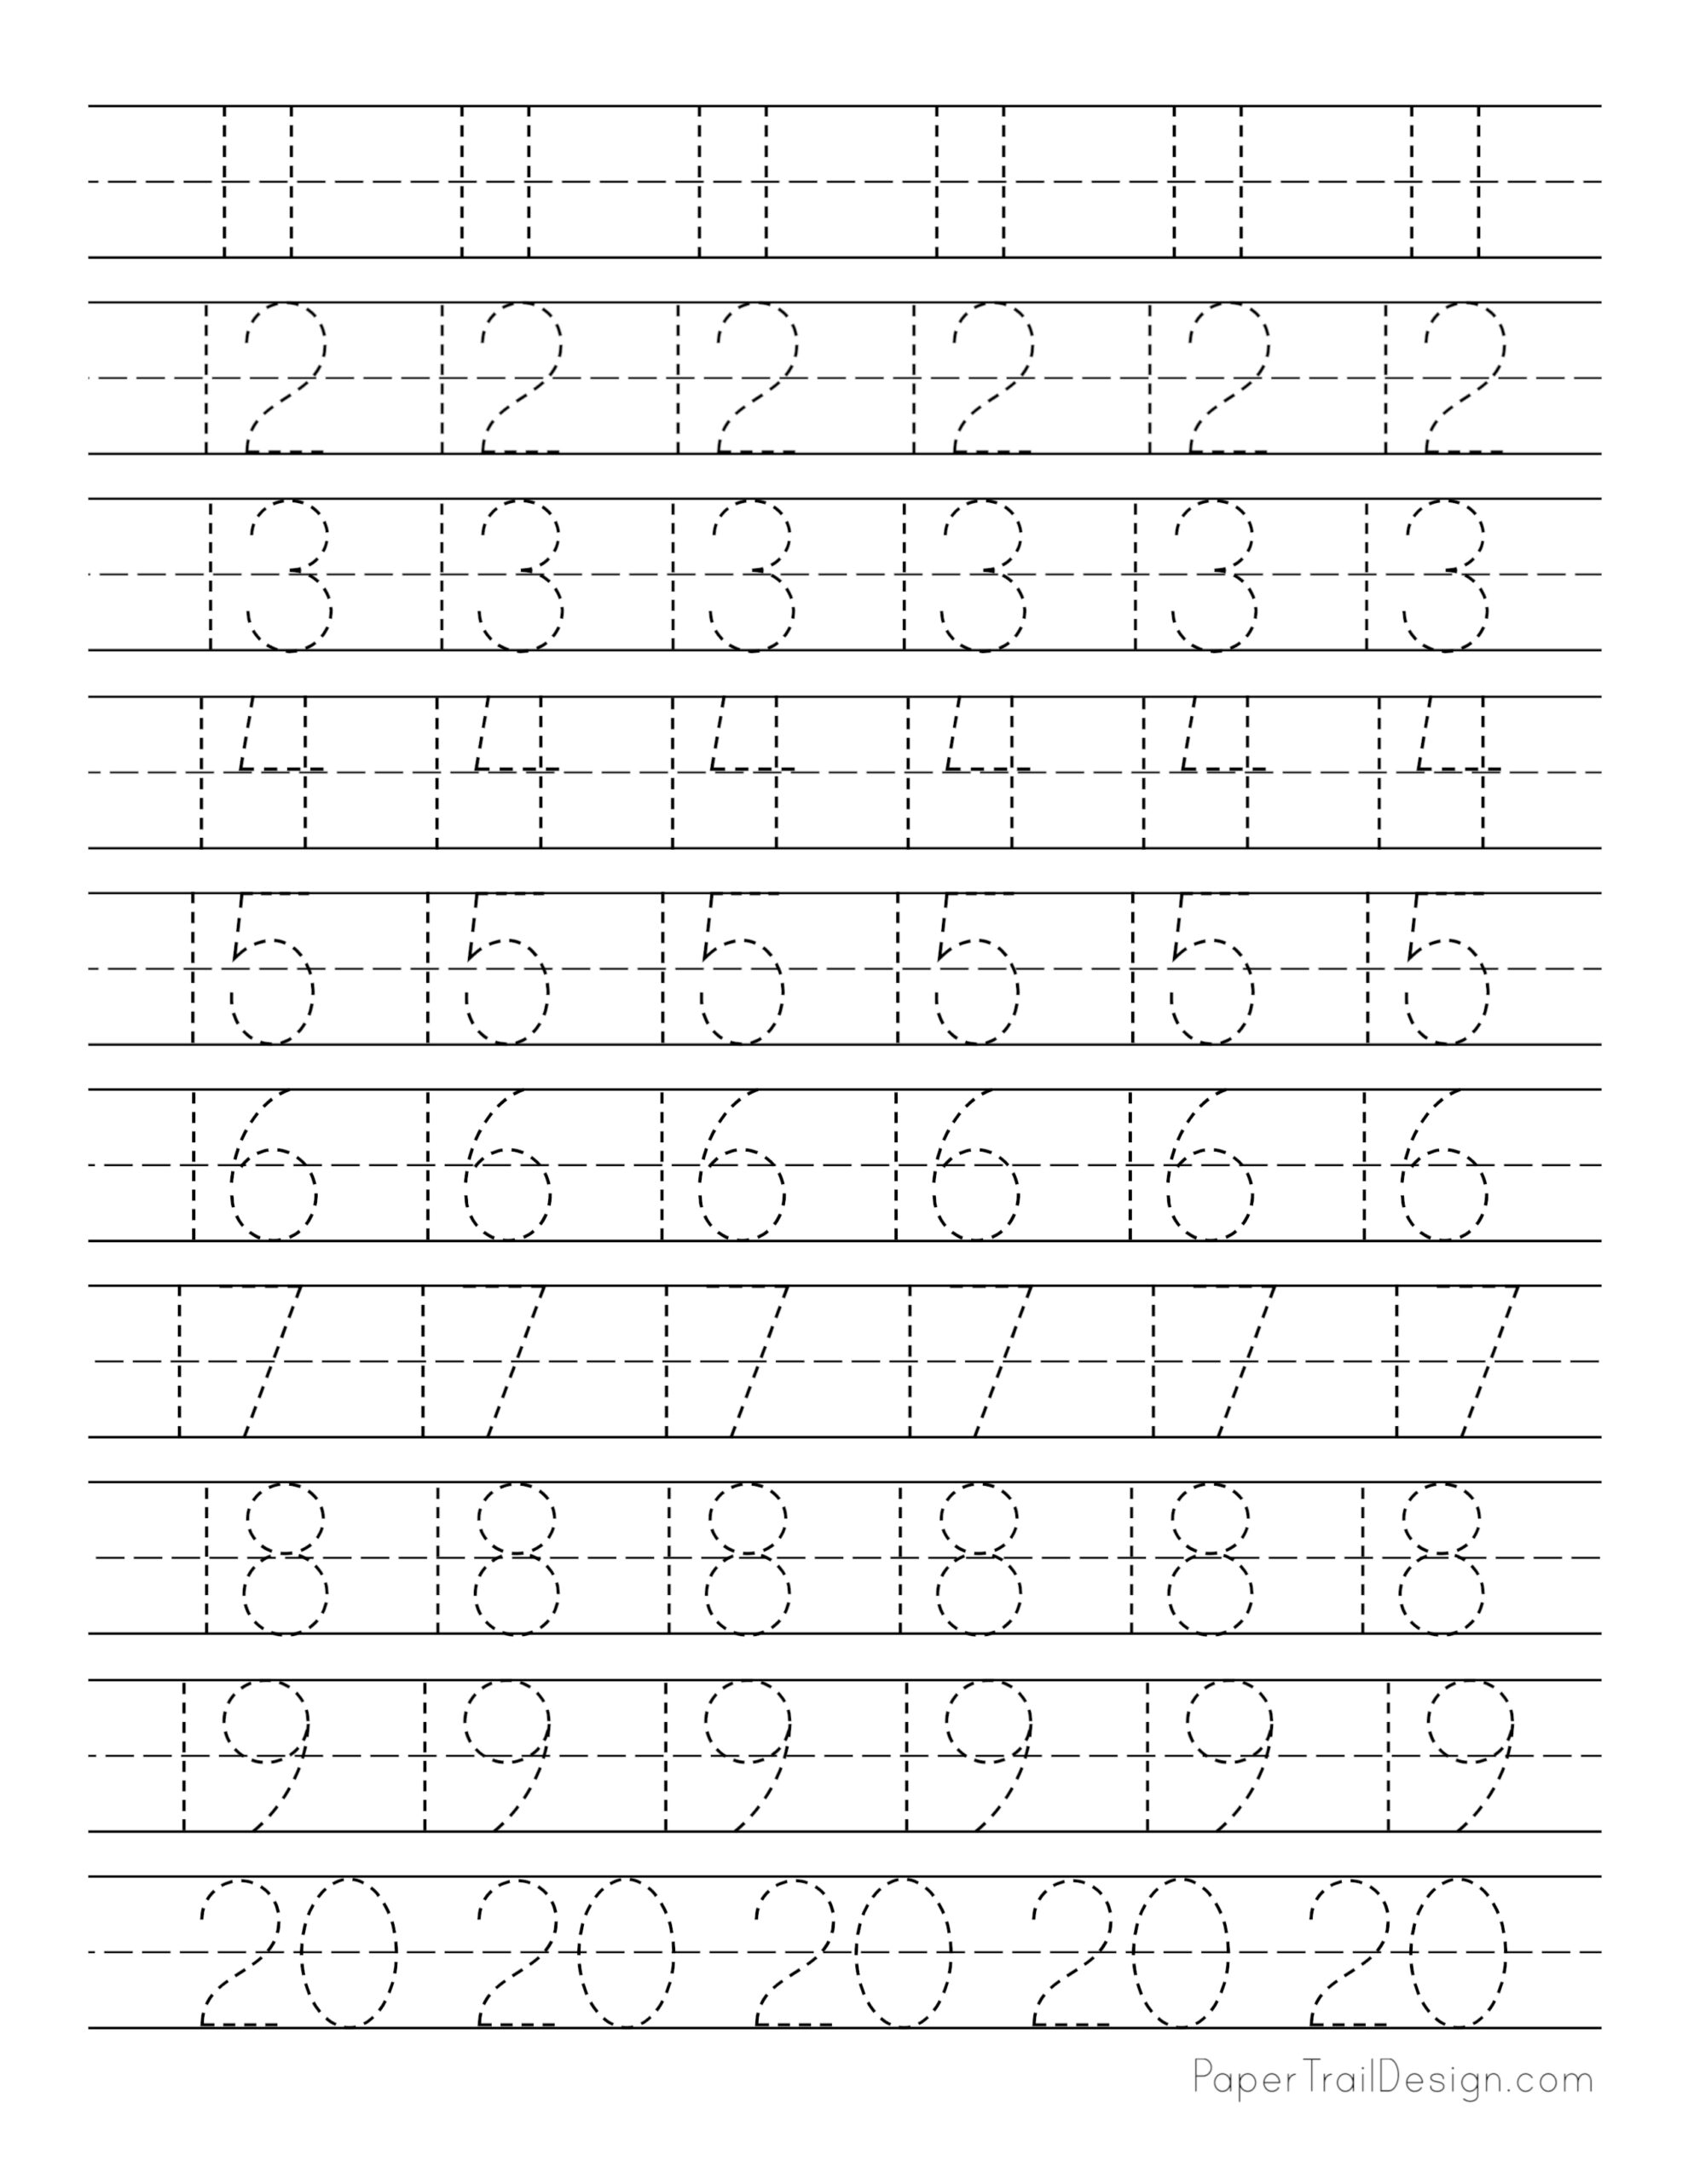 free number tracing worksheets paper trail design